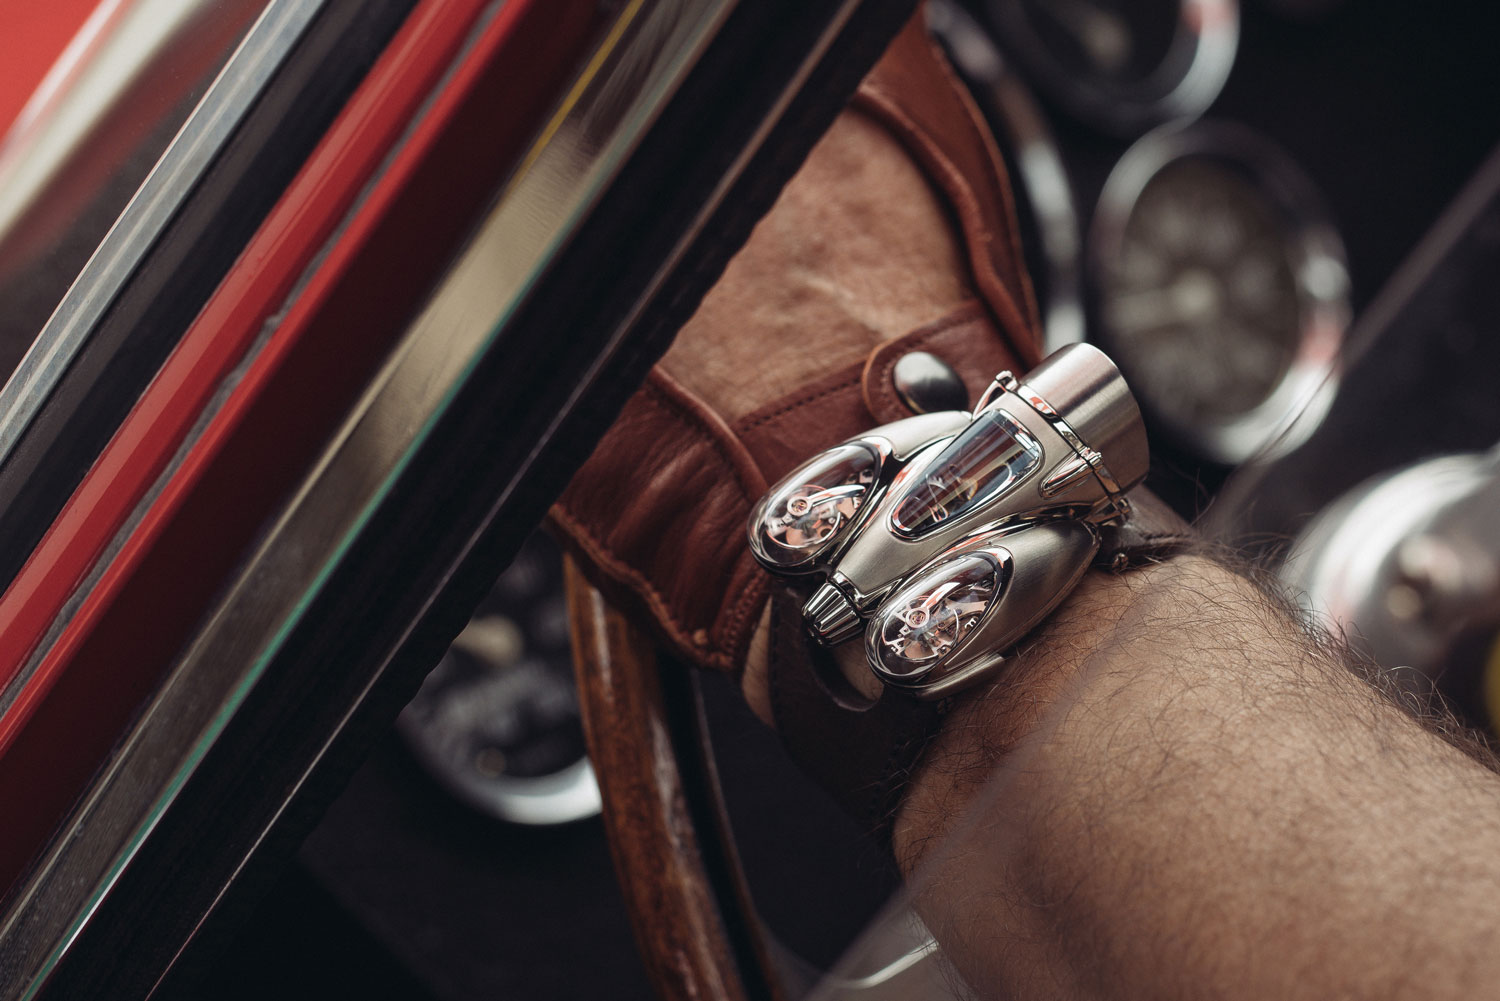 MB&F HM9